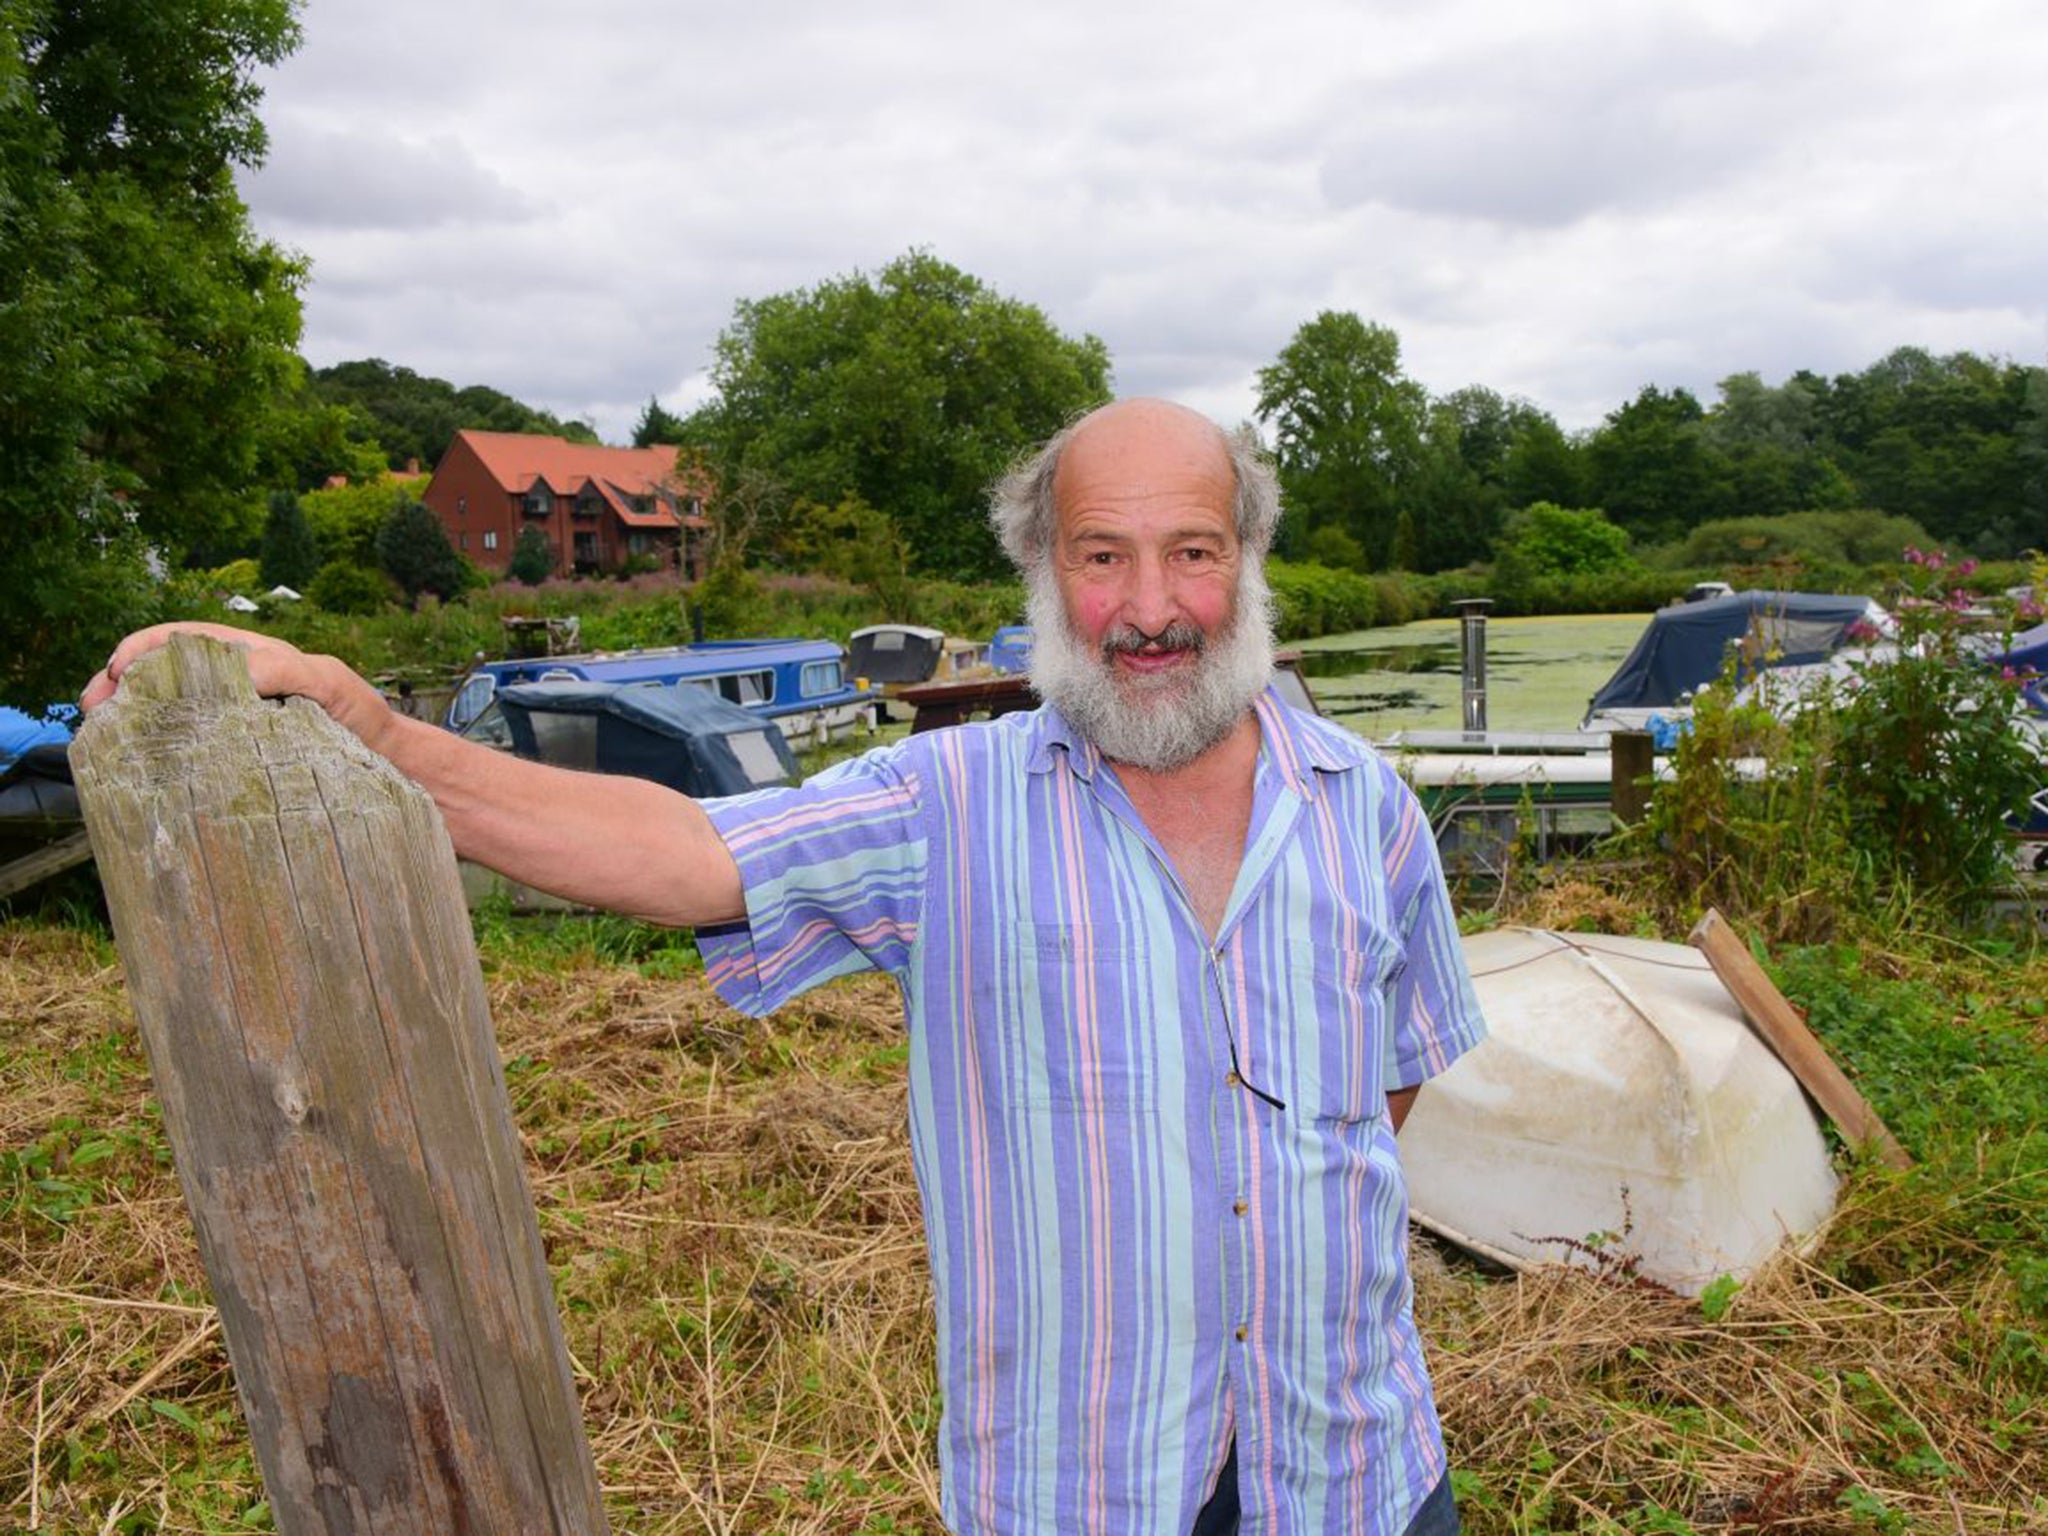 Roger Wood, owner of Jenner’s Basin marina in Norwich, is fighting to retain his mooring rights